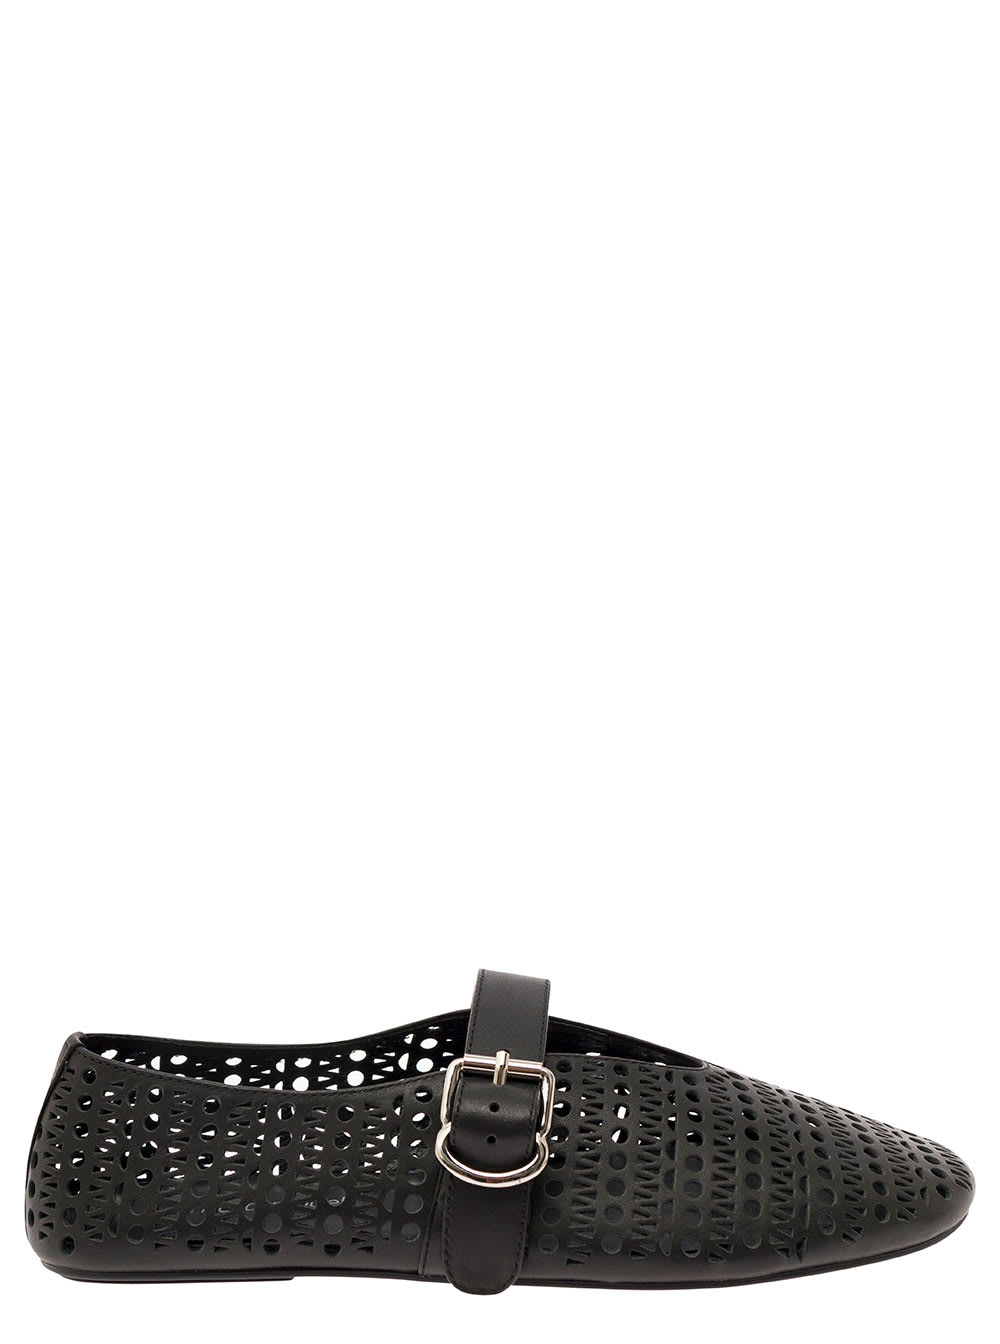 JEFFREY CAMPBELL SHELLY BLACK BALLET FLATS WITH MAXI BUCKLE IN LACE EFFECT LEATHER WOMAN